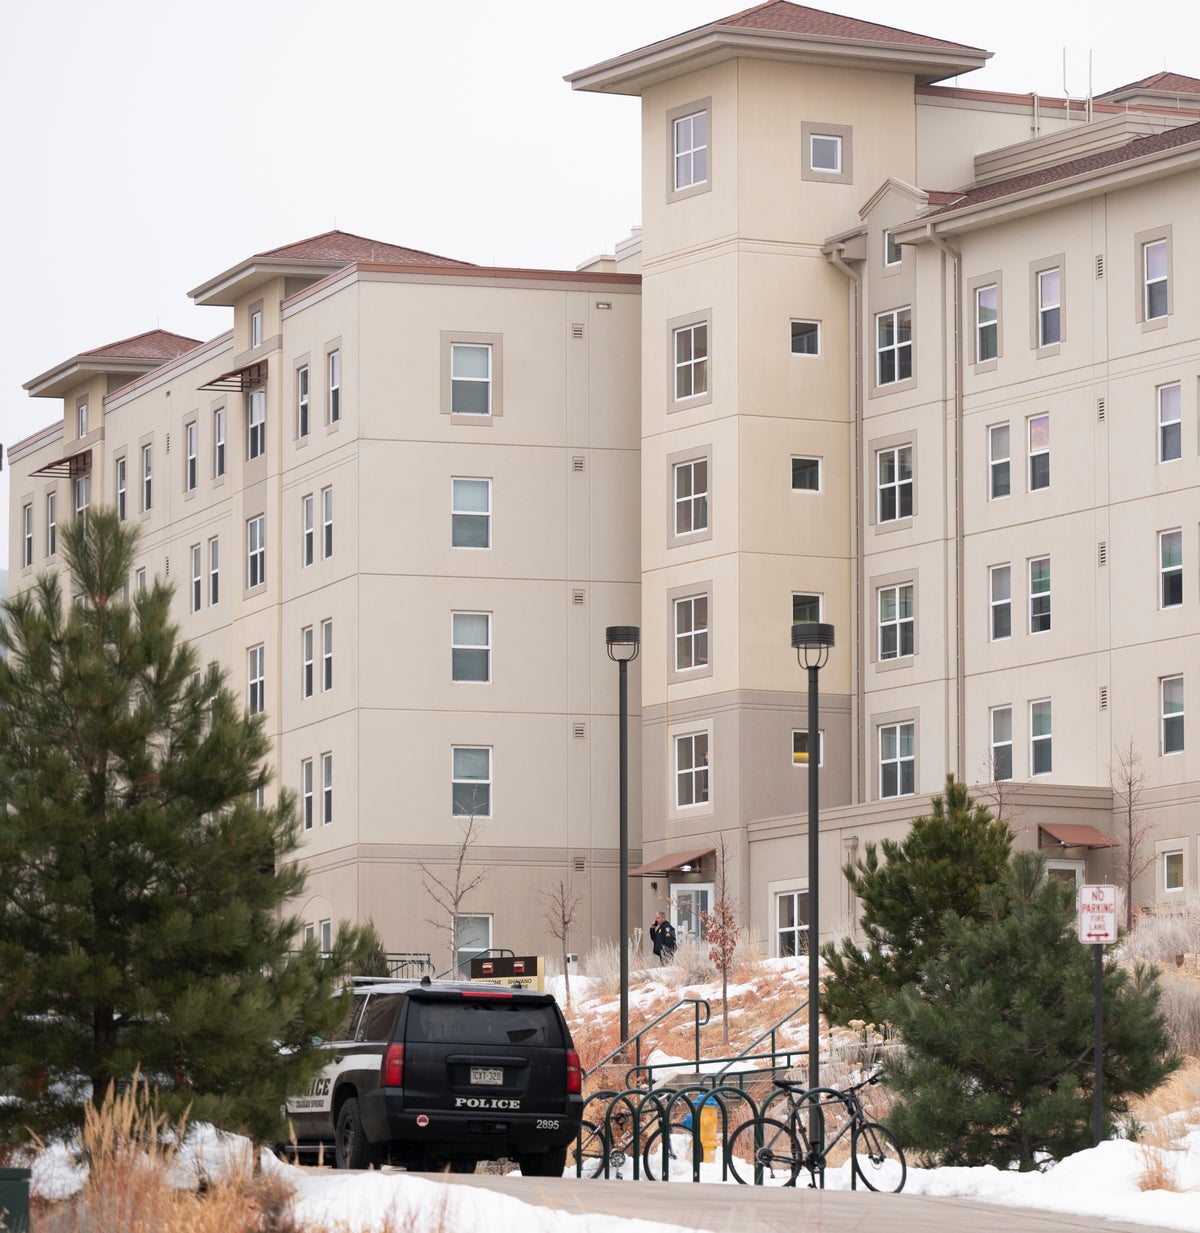 Colorado Springs campus remembers musician and mother killed in dorm shooting